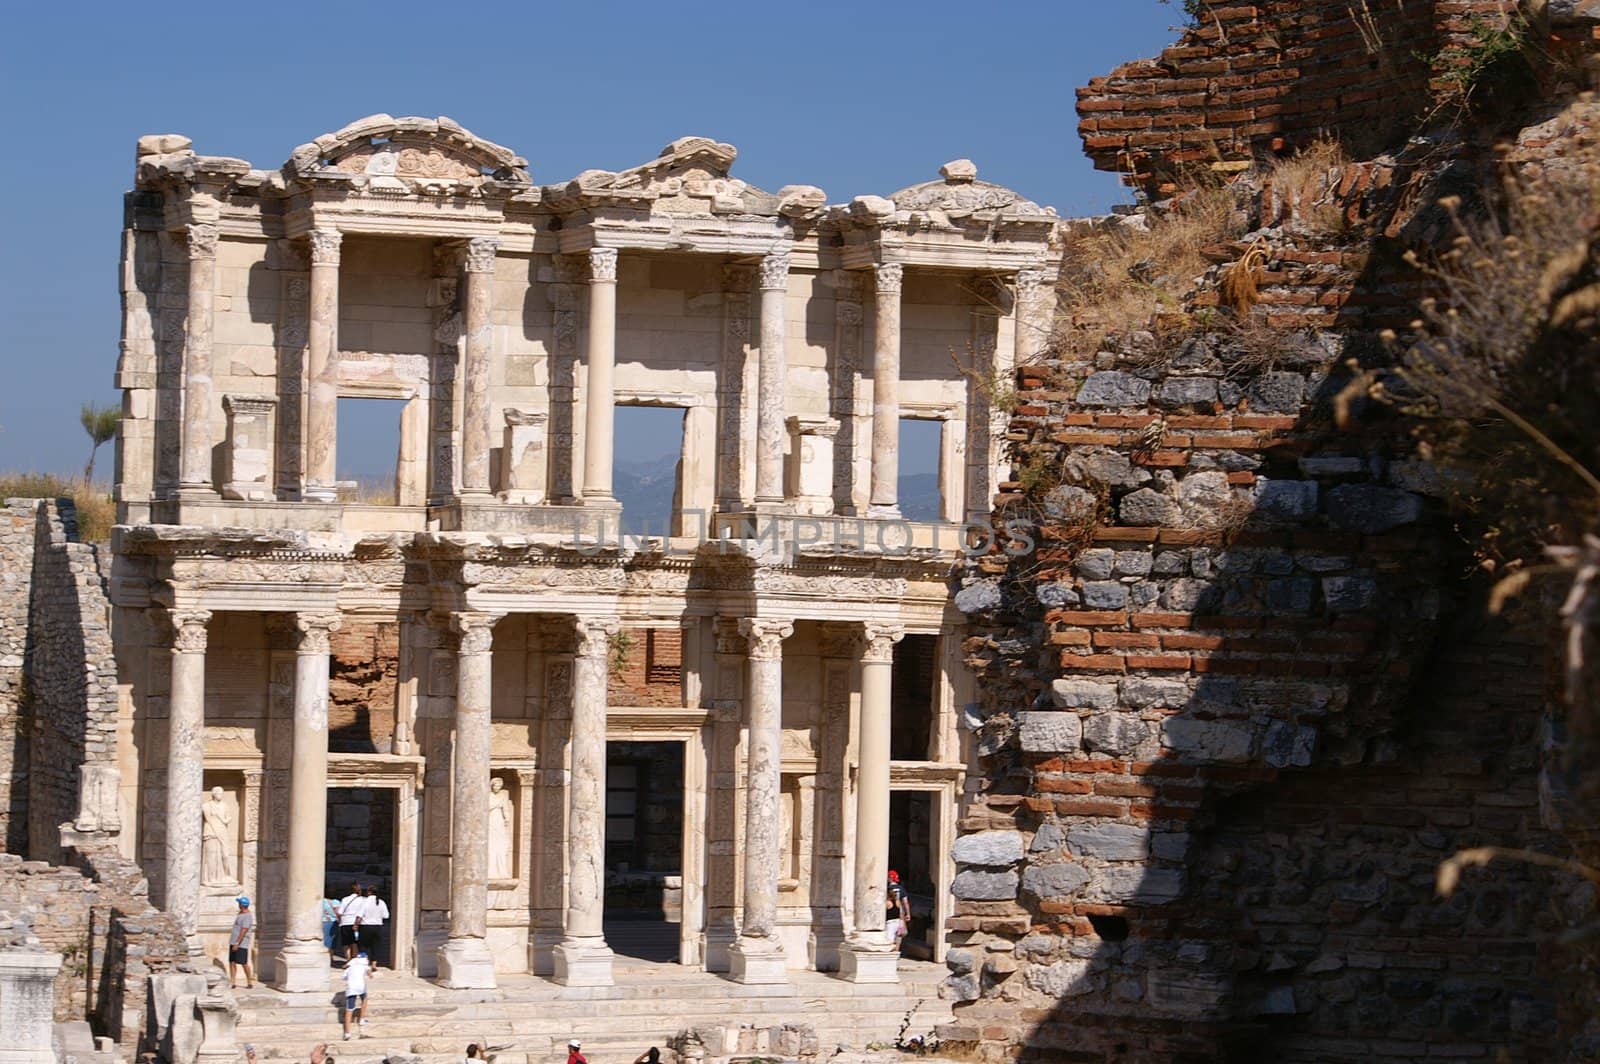 Facade of the Library of Celsus, Turkey